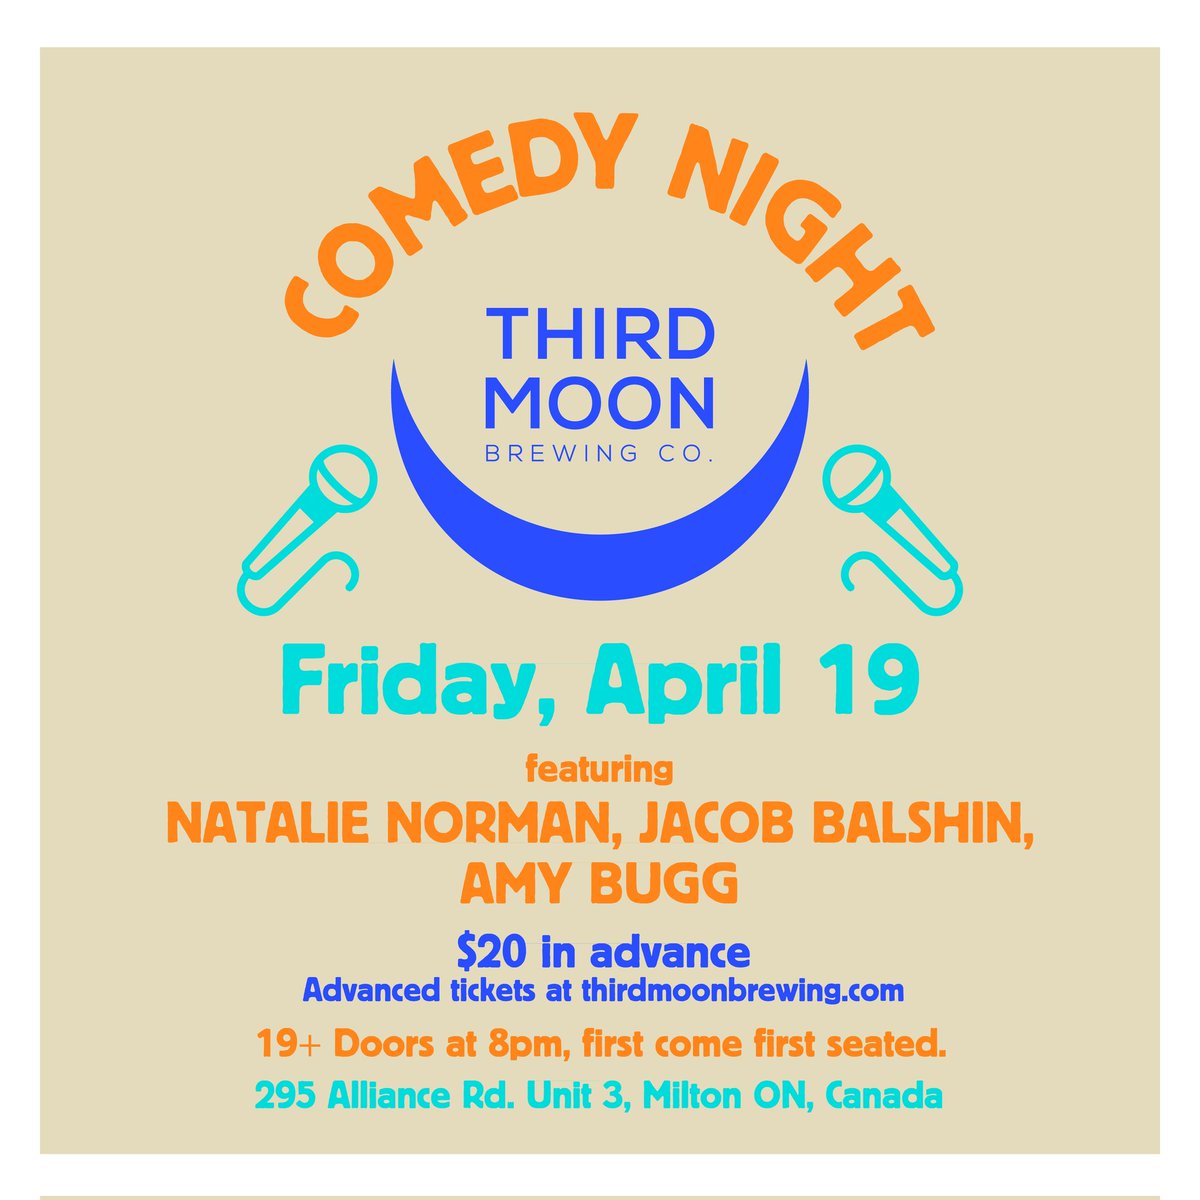 On Friday, April 19th we’re excited to welcome Natalie Norman, Amy Bugg and Jacob Balshin to the brewery for a night of stand-up comedy! Tickets available at link in bio 🍻